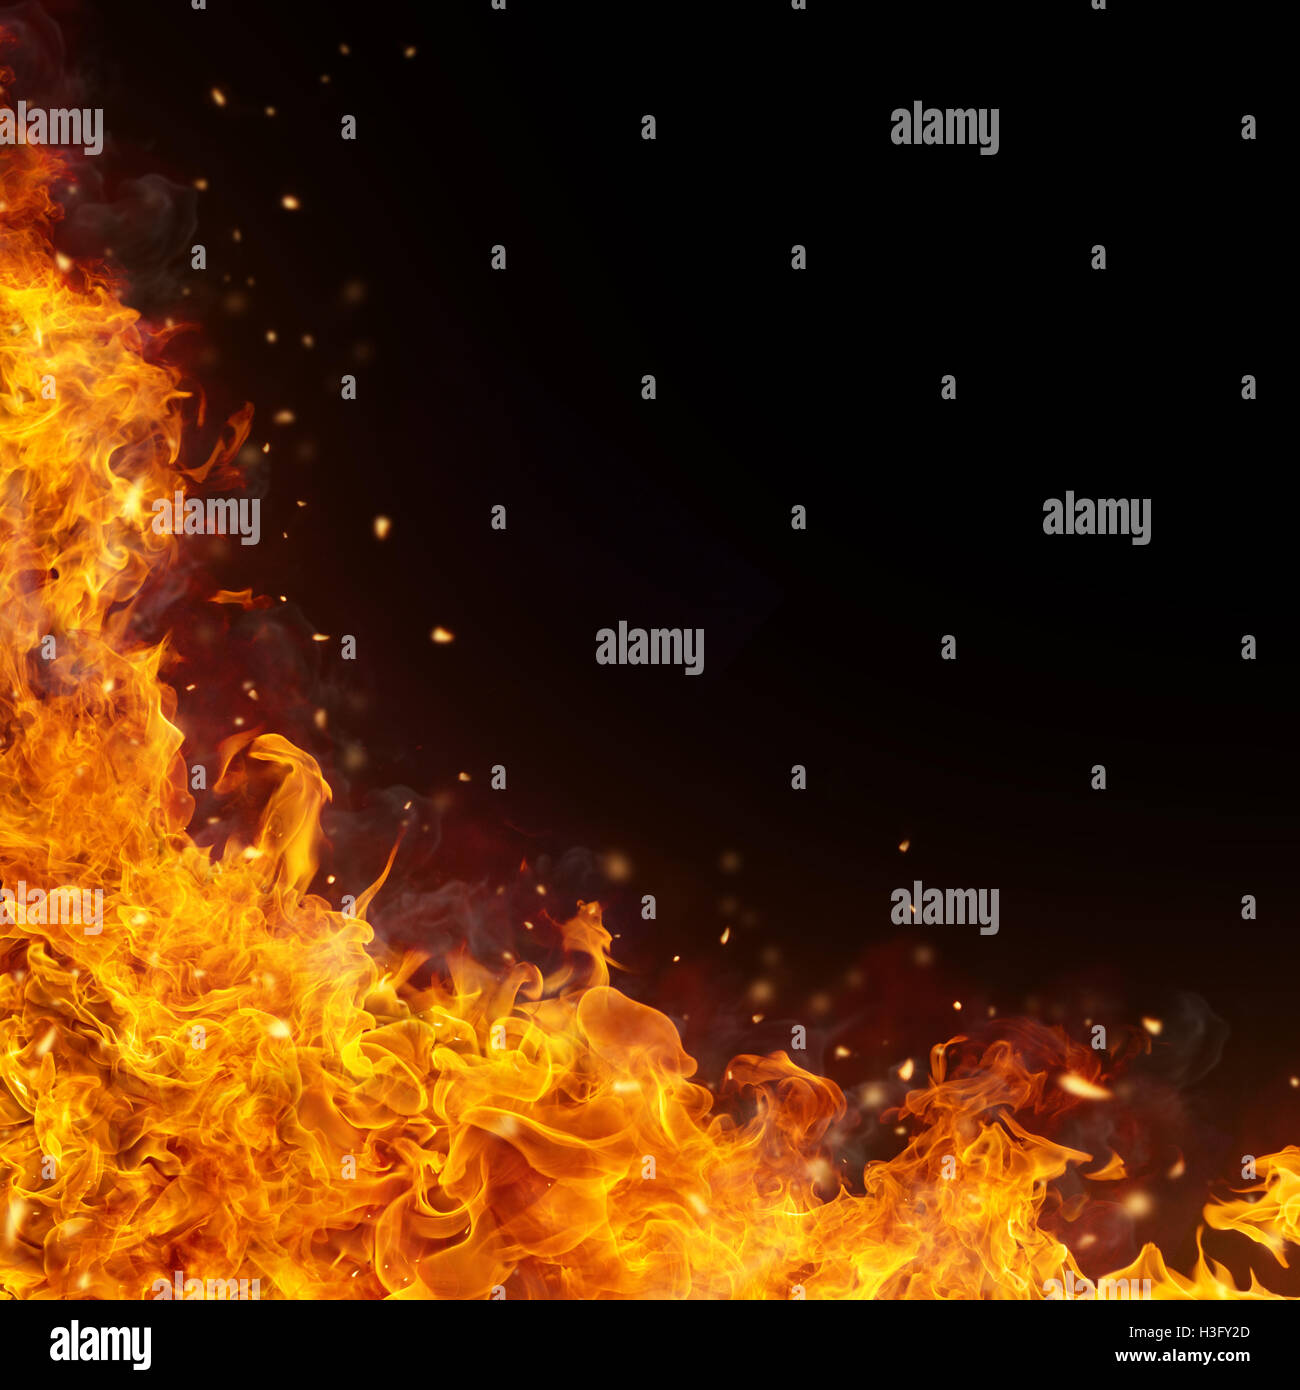 Abstract fire flames background with free space for text. Isolated on black Stock Photo